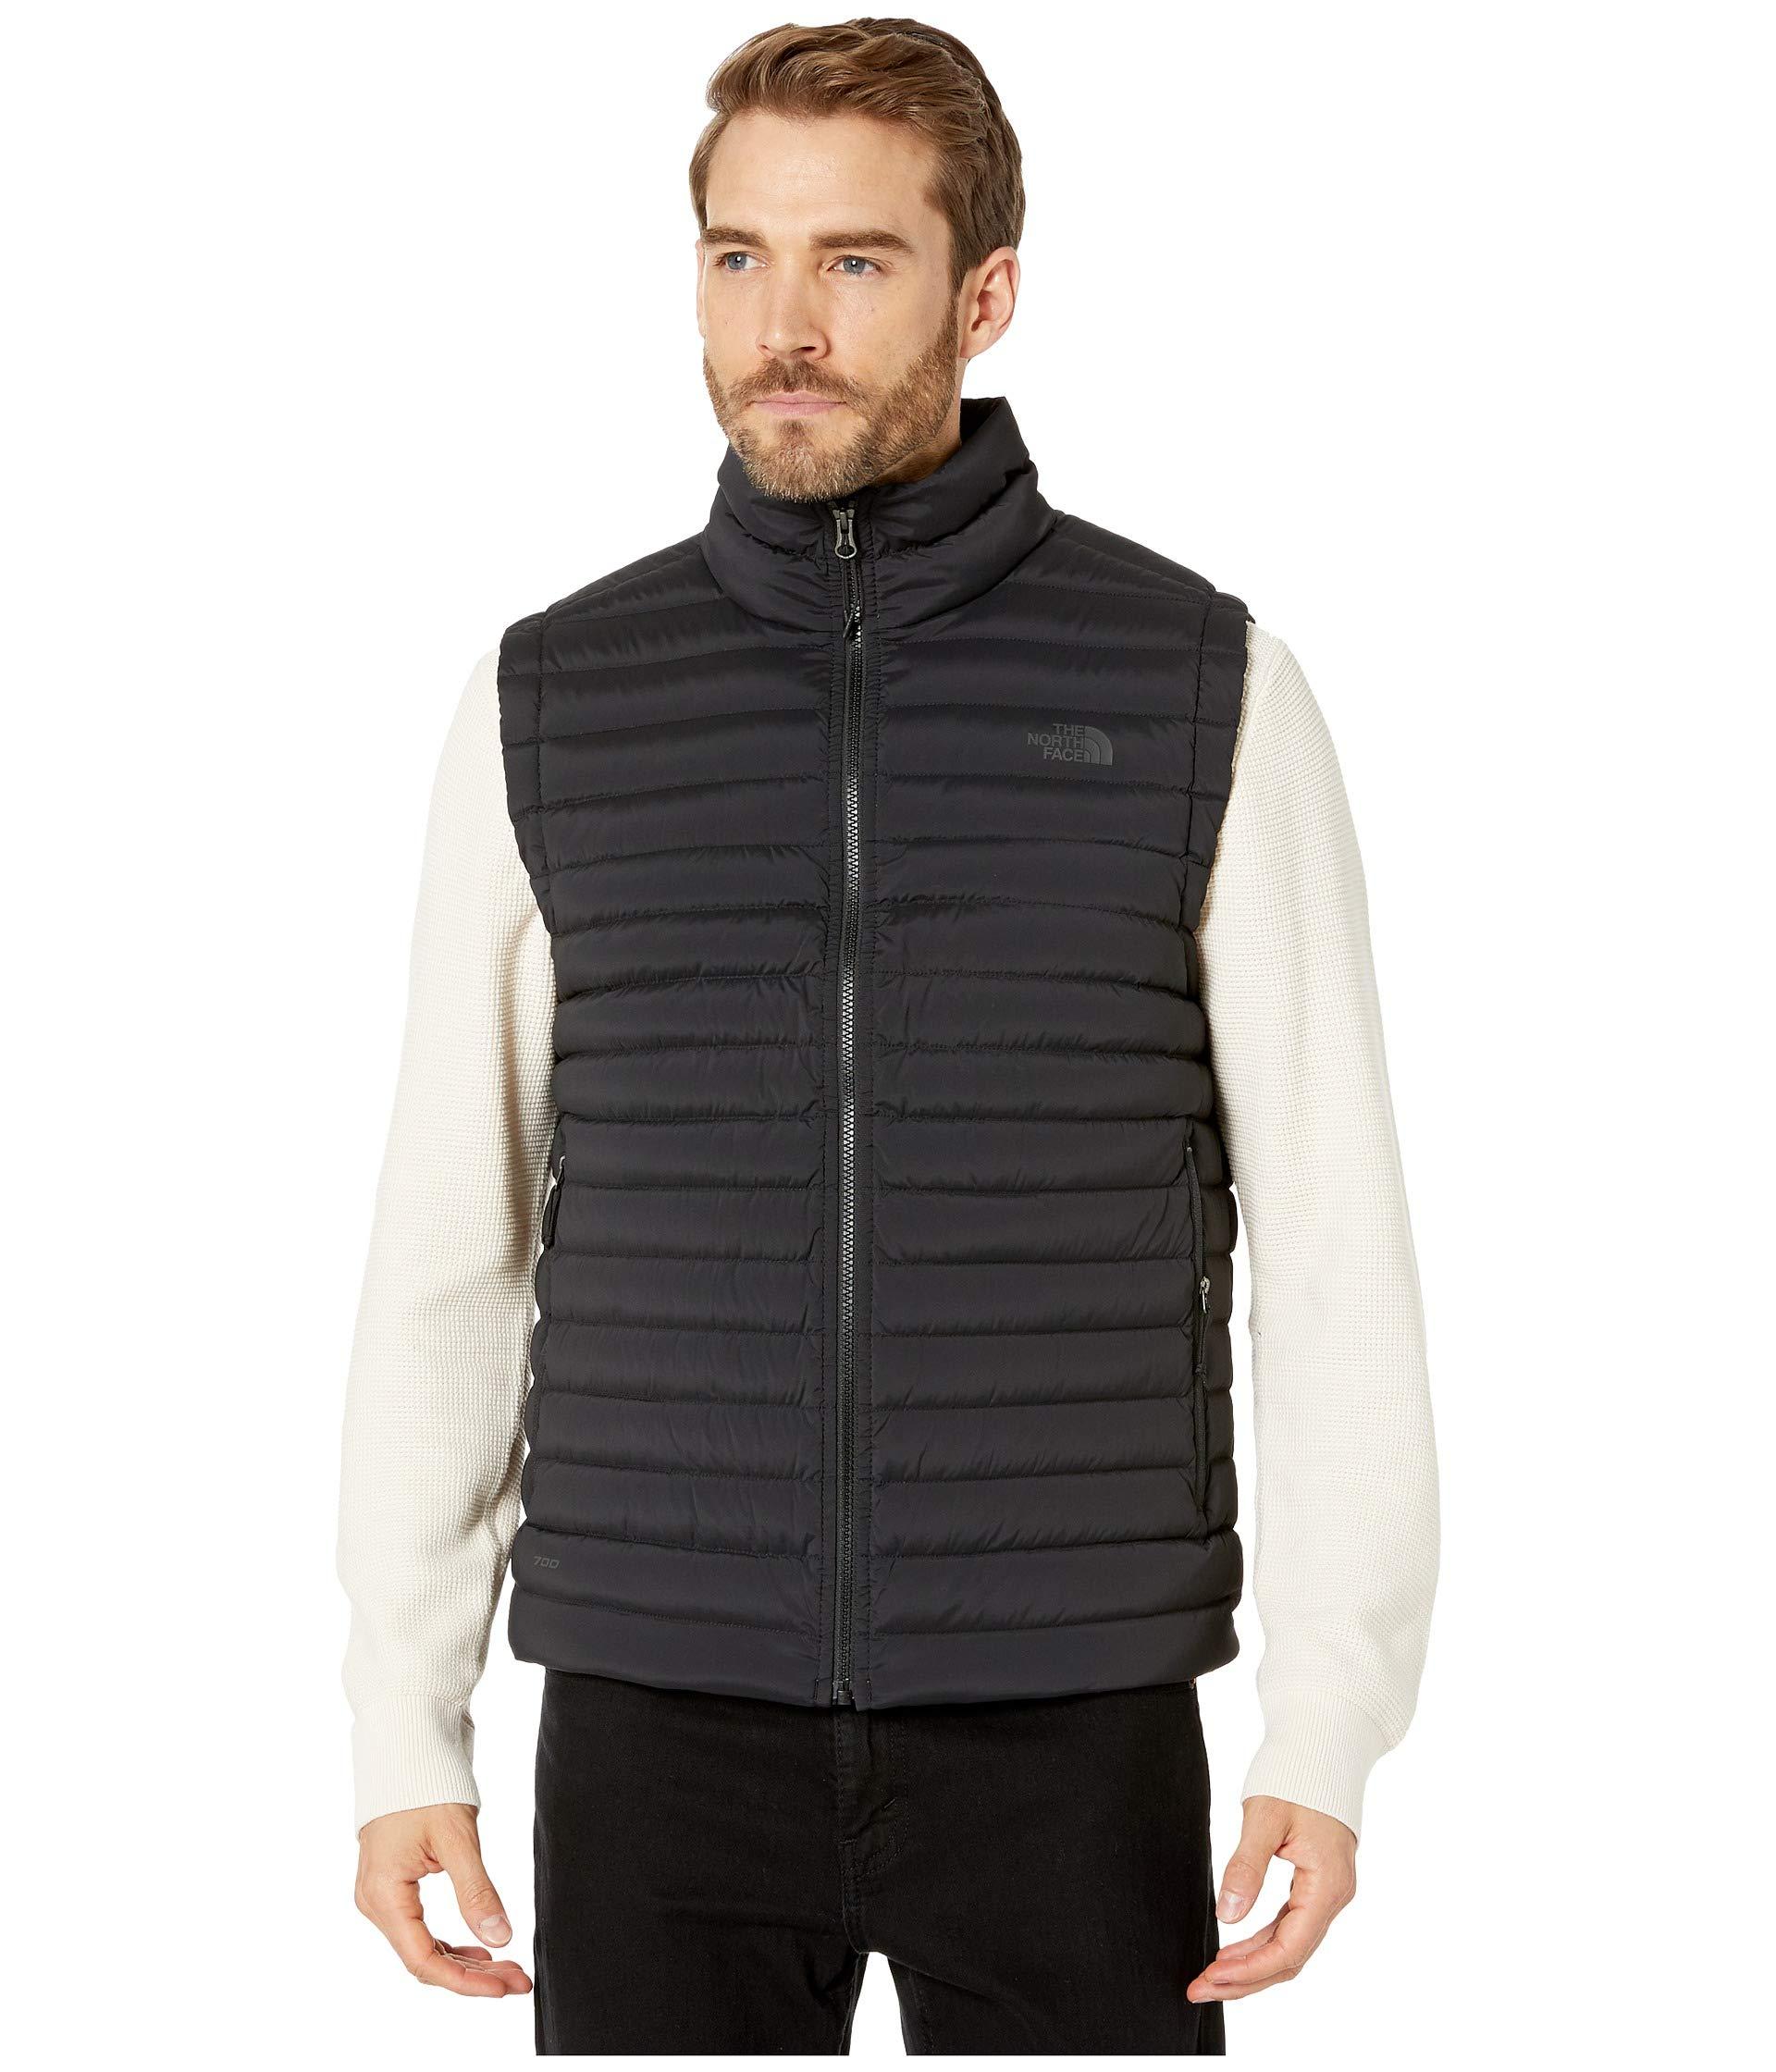 The North Face Goose Stretch Down Vest in Black for Men - Lyst